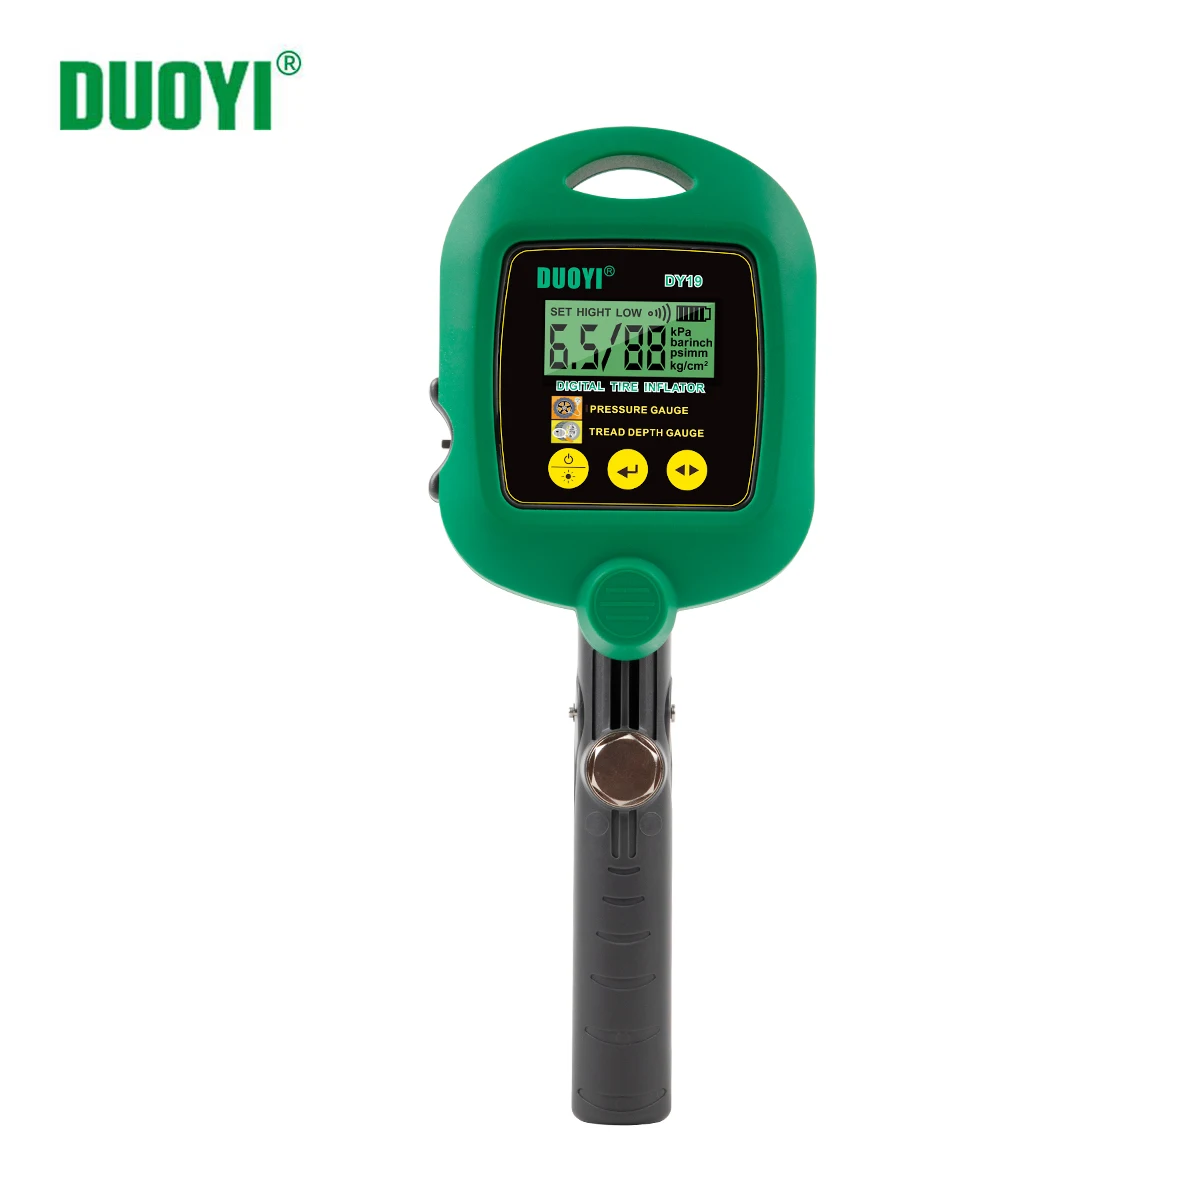 

DUOYI DY19 Inflator Pump Portable Car Air Compressor for Motorcycles Bicycle Boat Tyre Inflator Smart Digital Tire Pressure Test